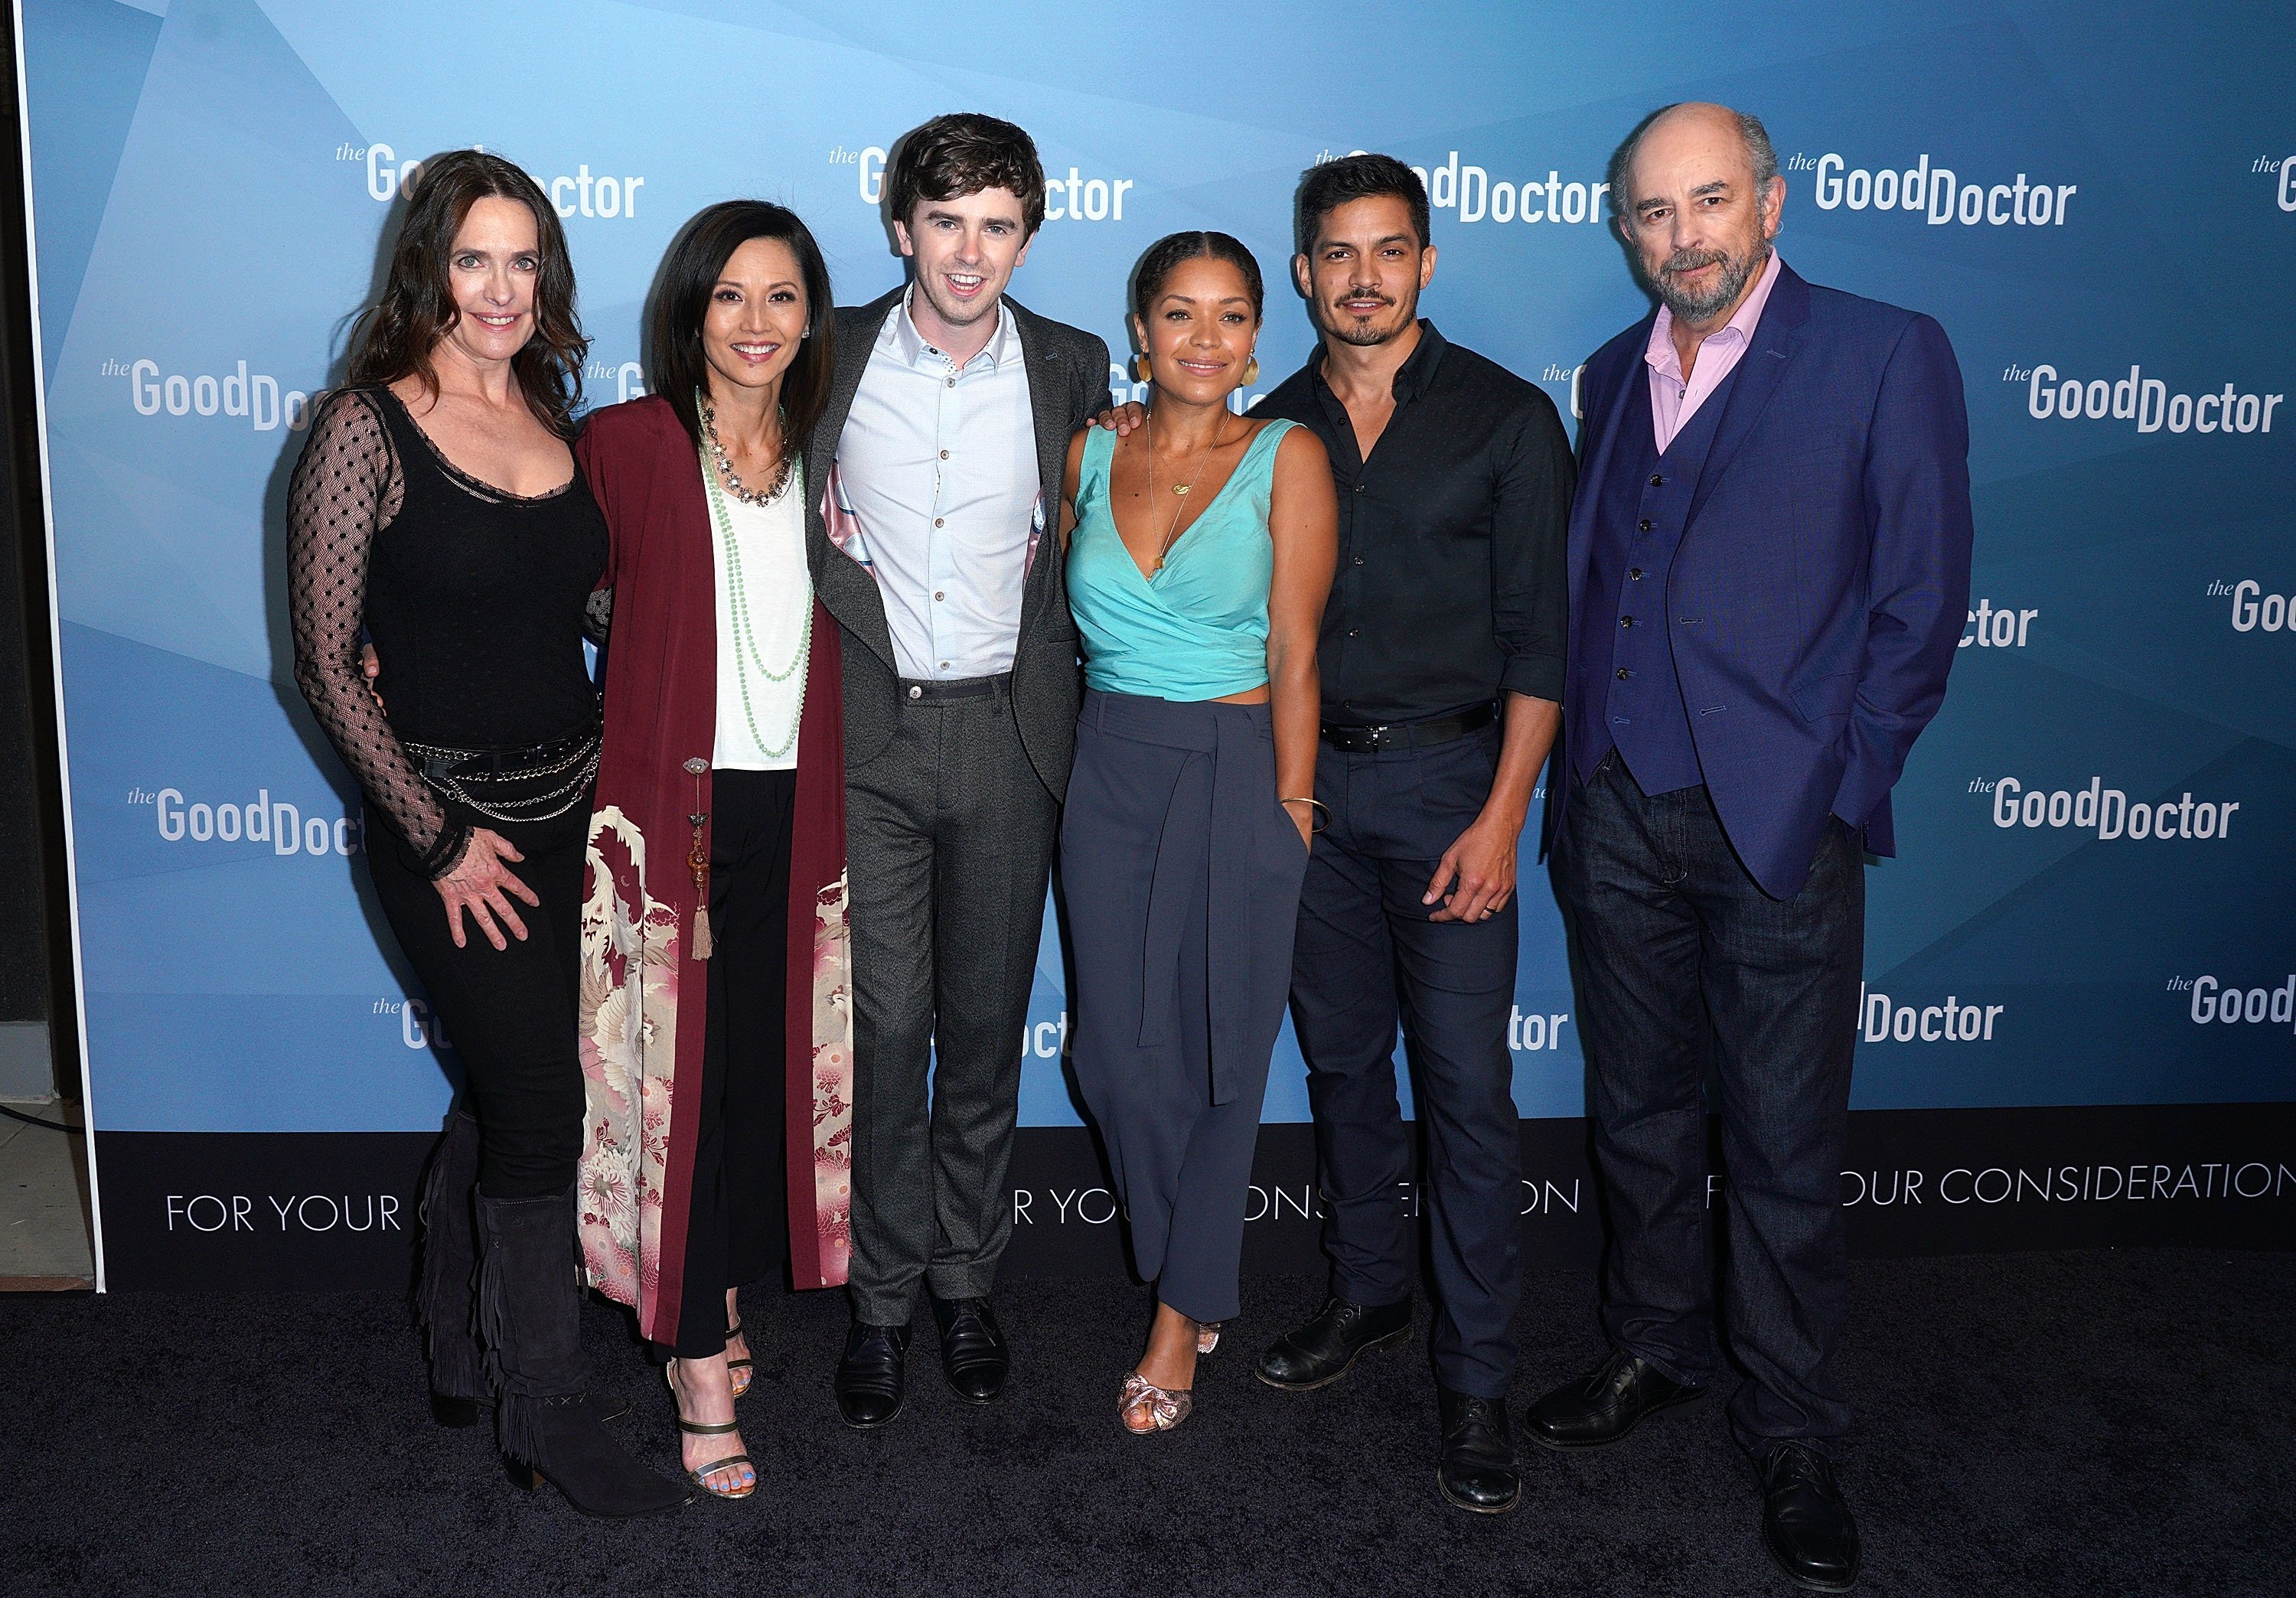 The cast of "The Good Doctor" attends the For Your Consieration Event in Culver City, California on May 22, 2018 | Photo: Getty Images